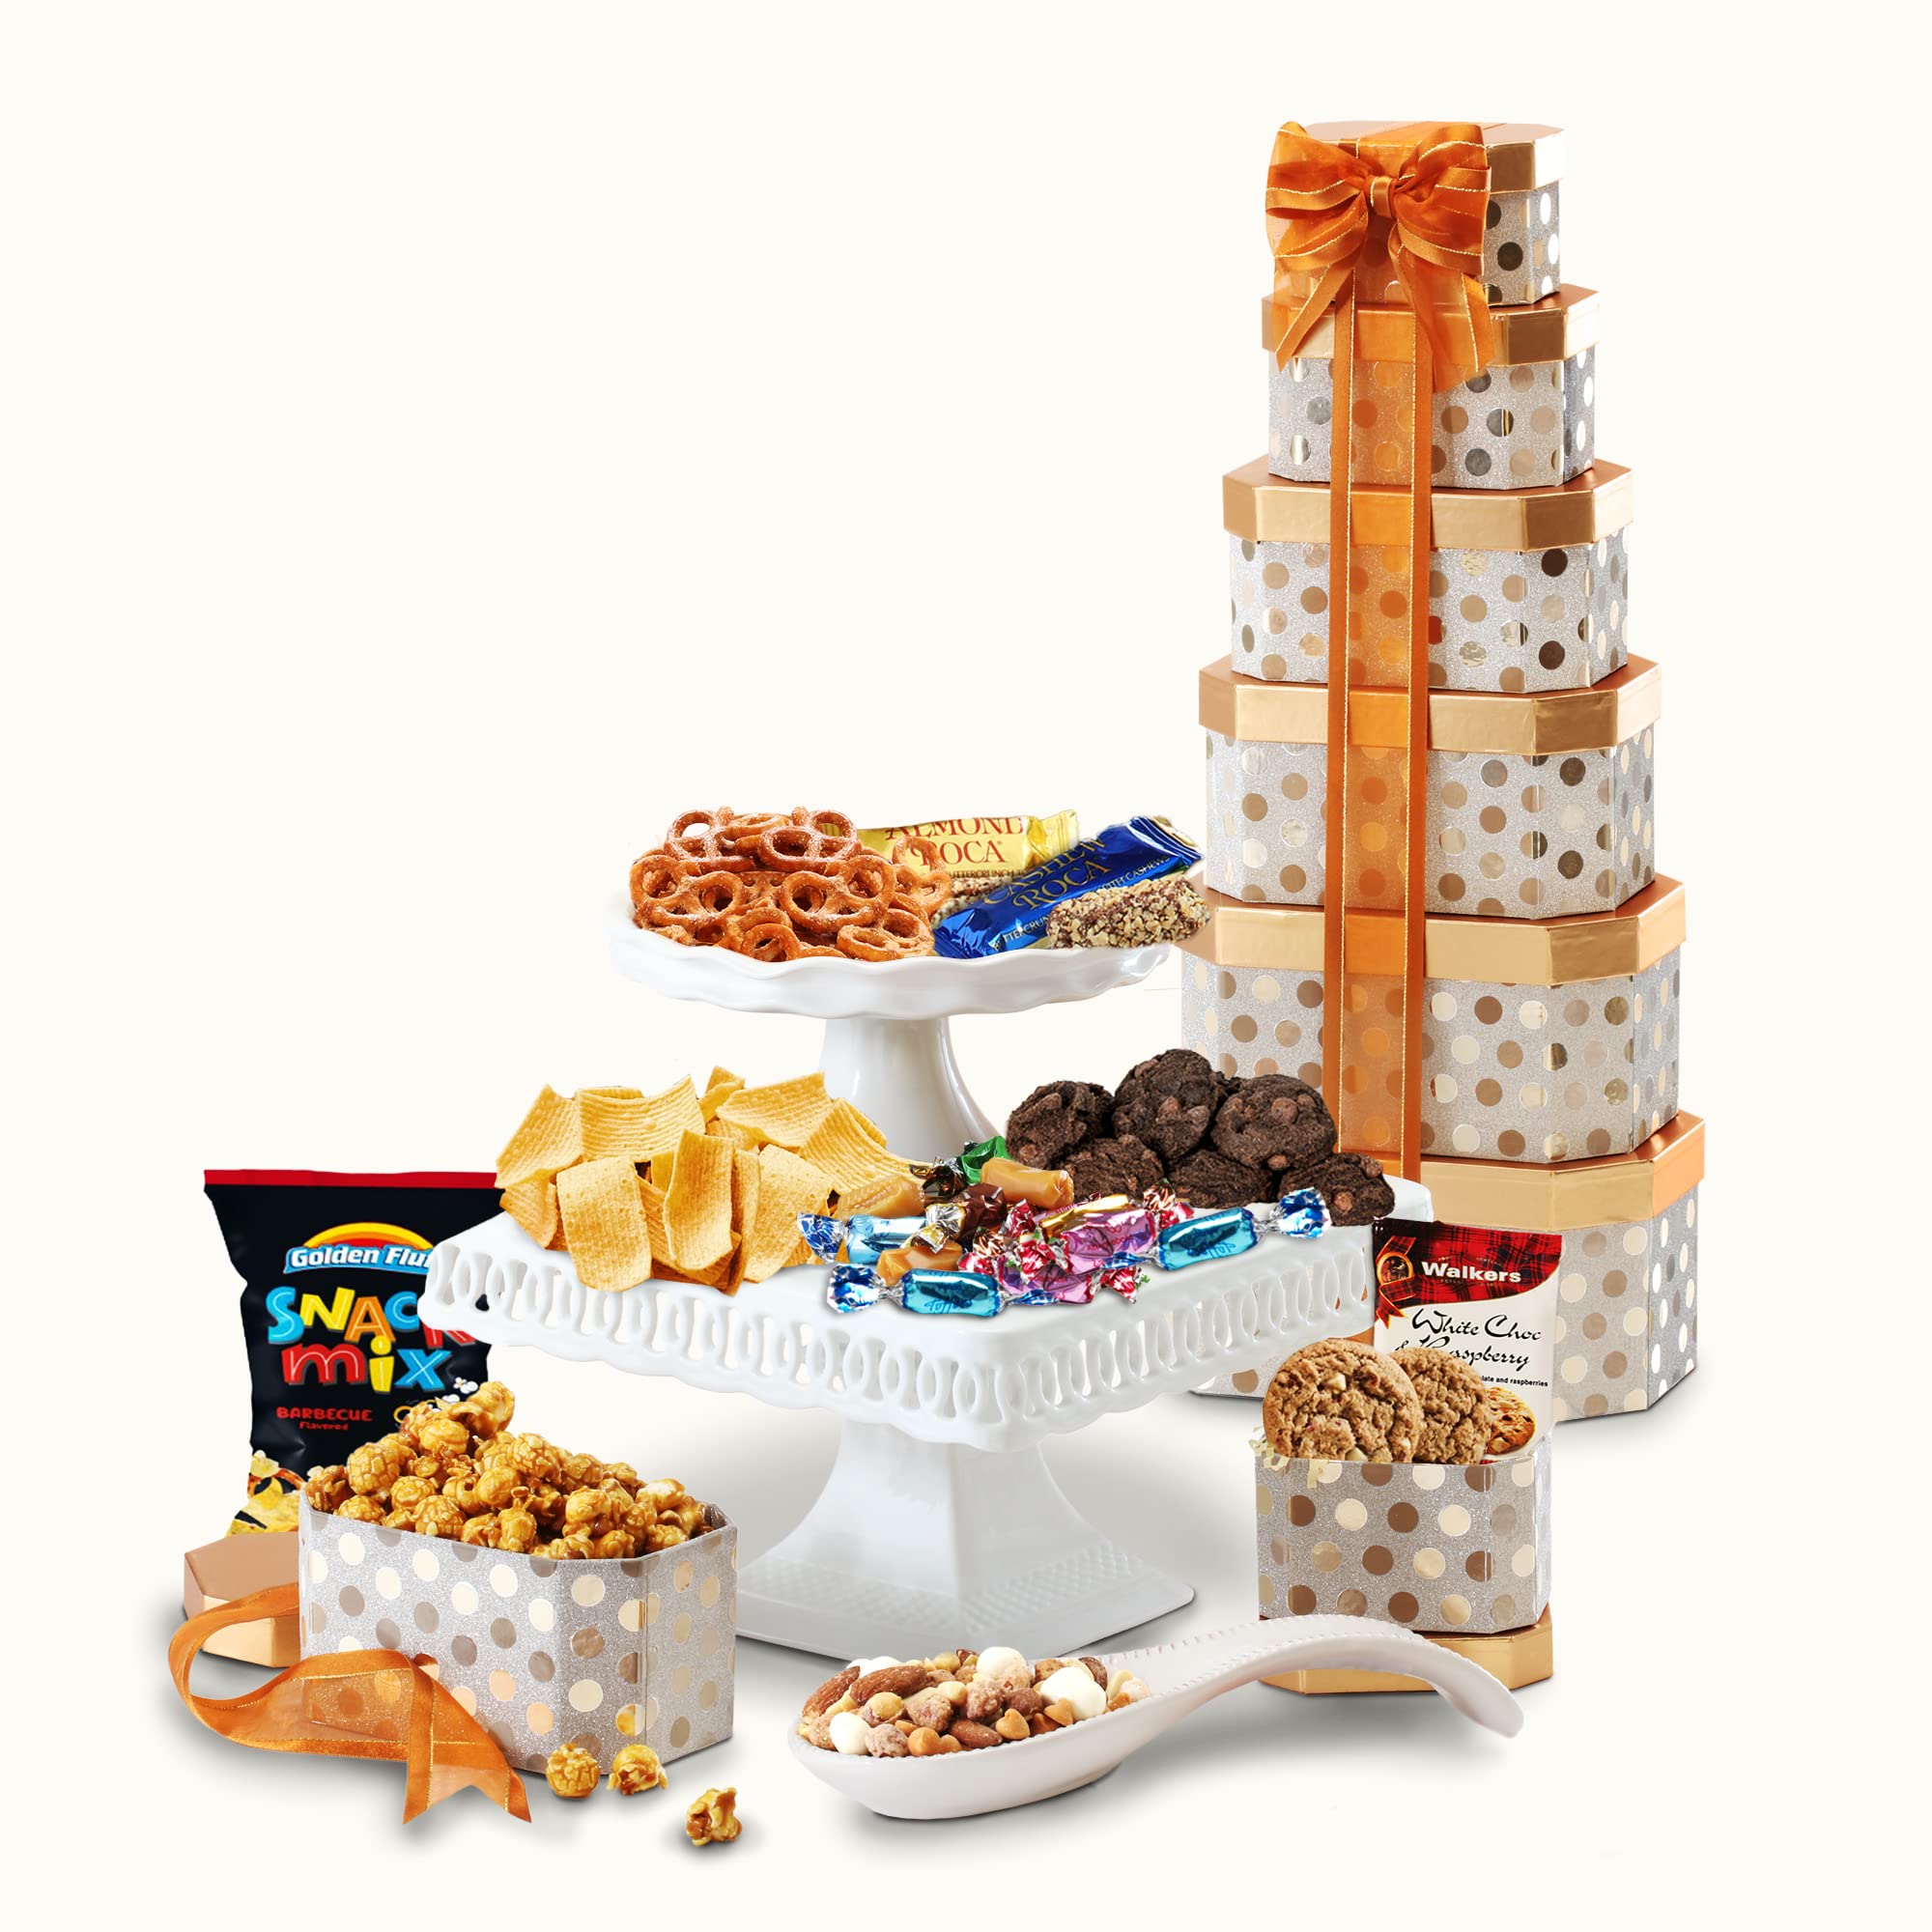 Broadway Basketeers 6 Box Gourmet Food Gift Tower Snack Gifts for Women, Men, Families, College – Delivery for Holidays, Appreciation, Thank You, C...